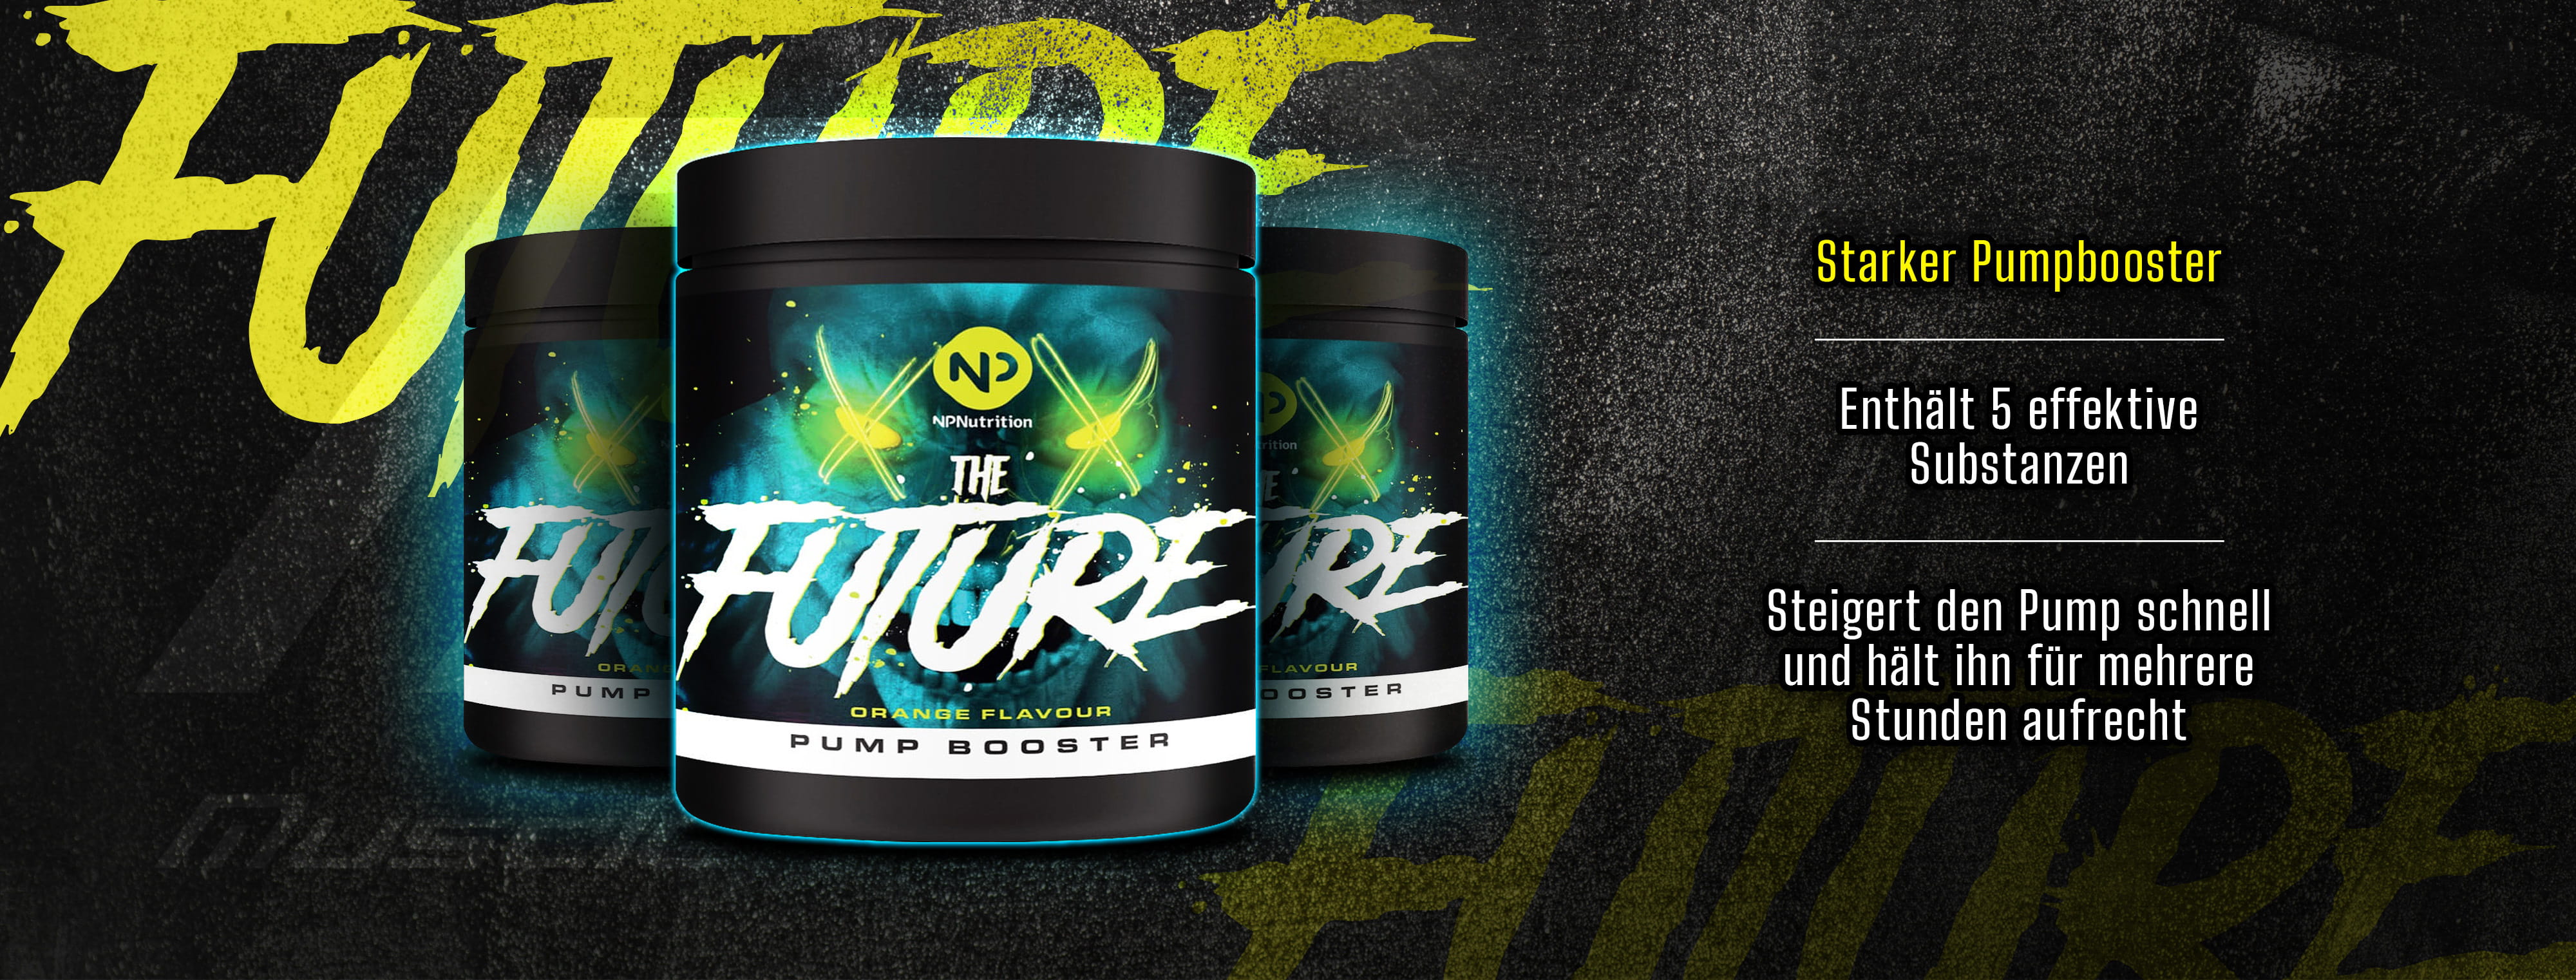 NP Nutrition The Future